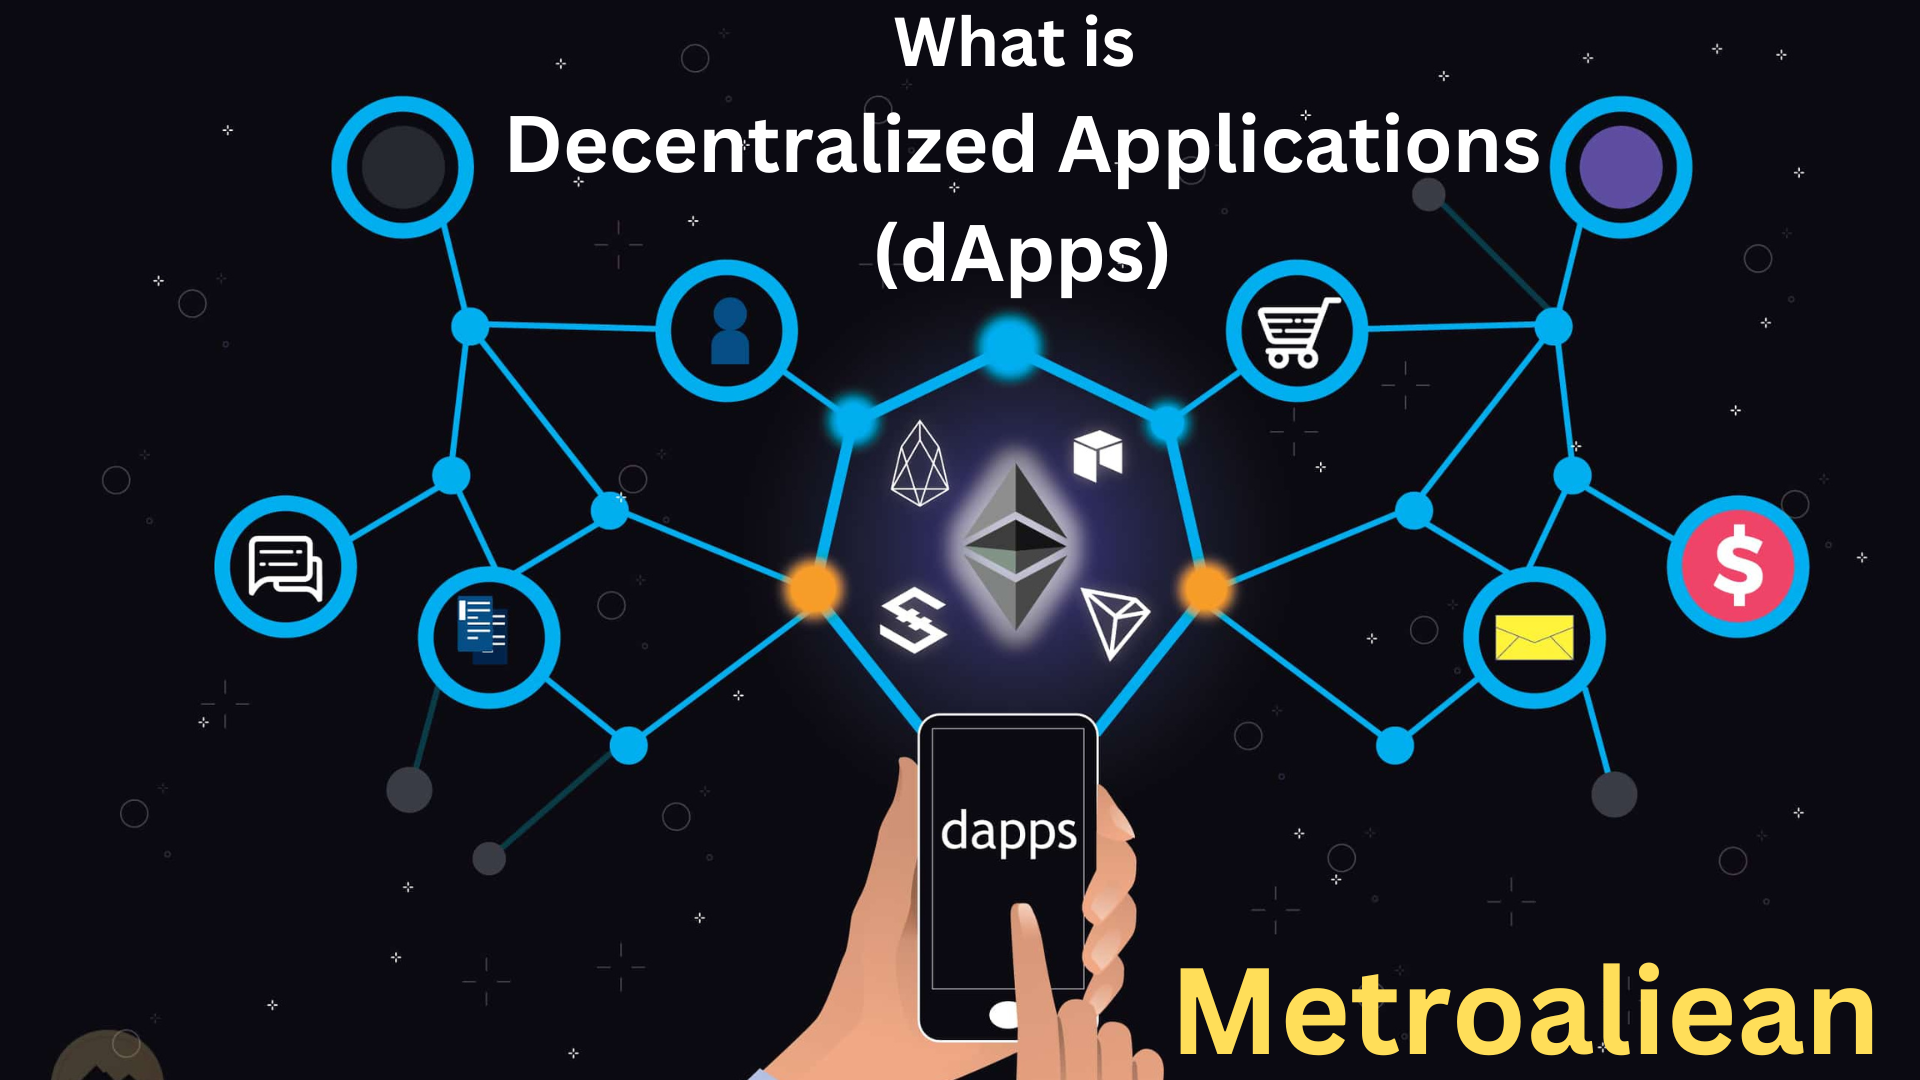 What is Decentralized Applications (dApps) in blockchain